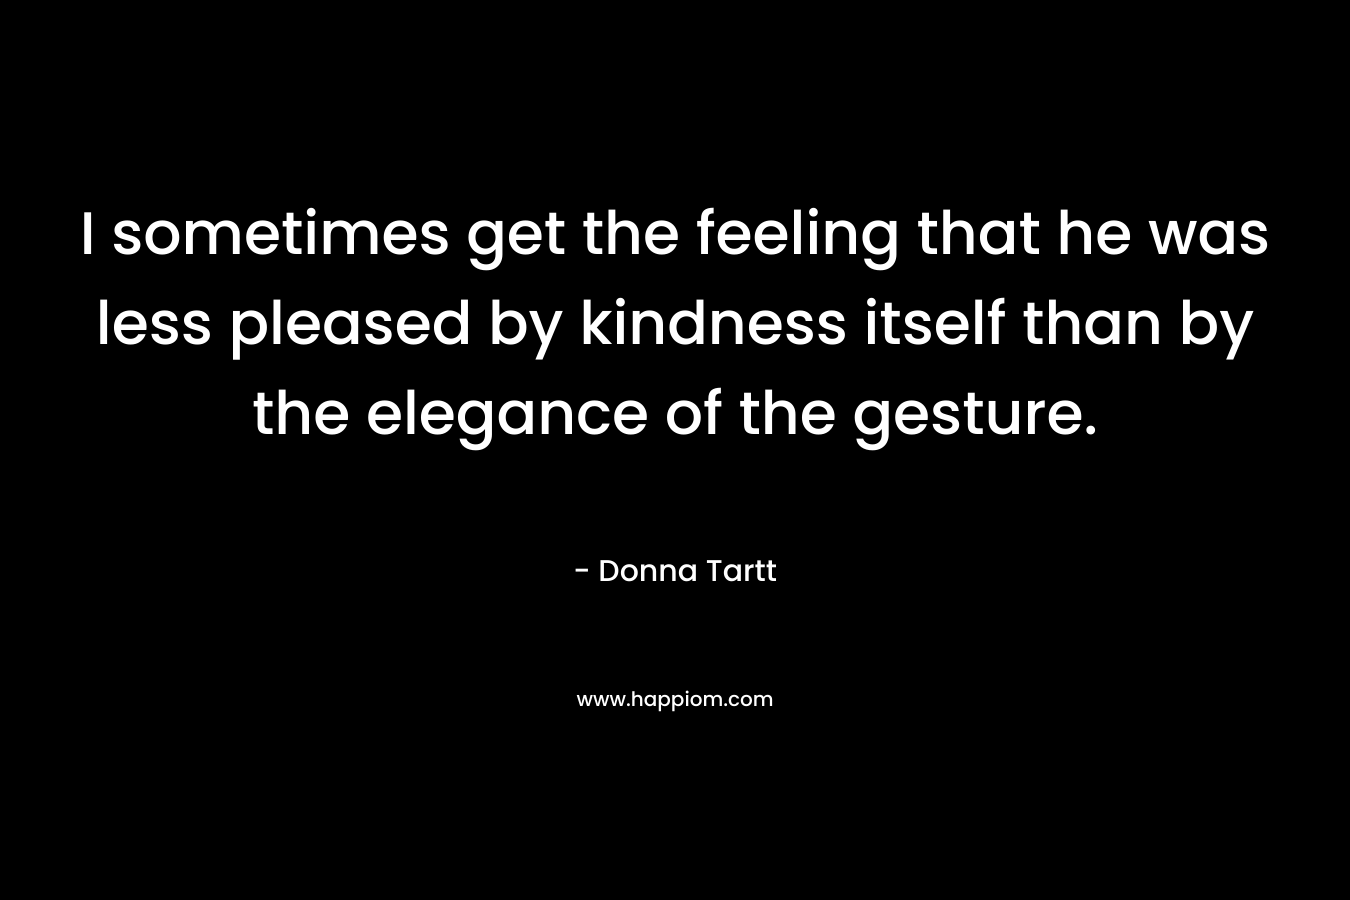 I sometimes get the feeling that he was less pleased by kindness itself than by the elegance of the gesture.